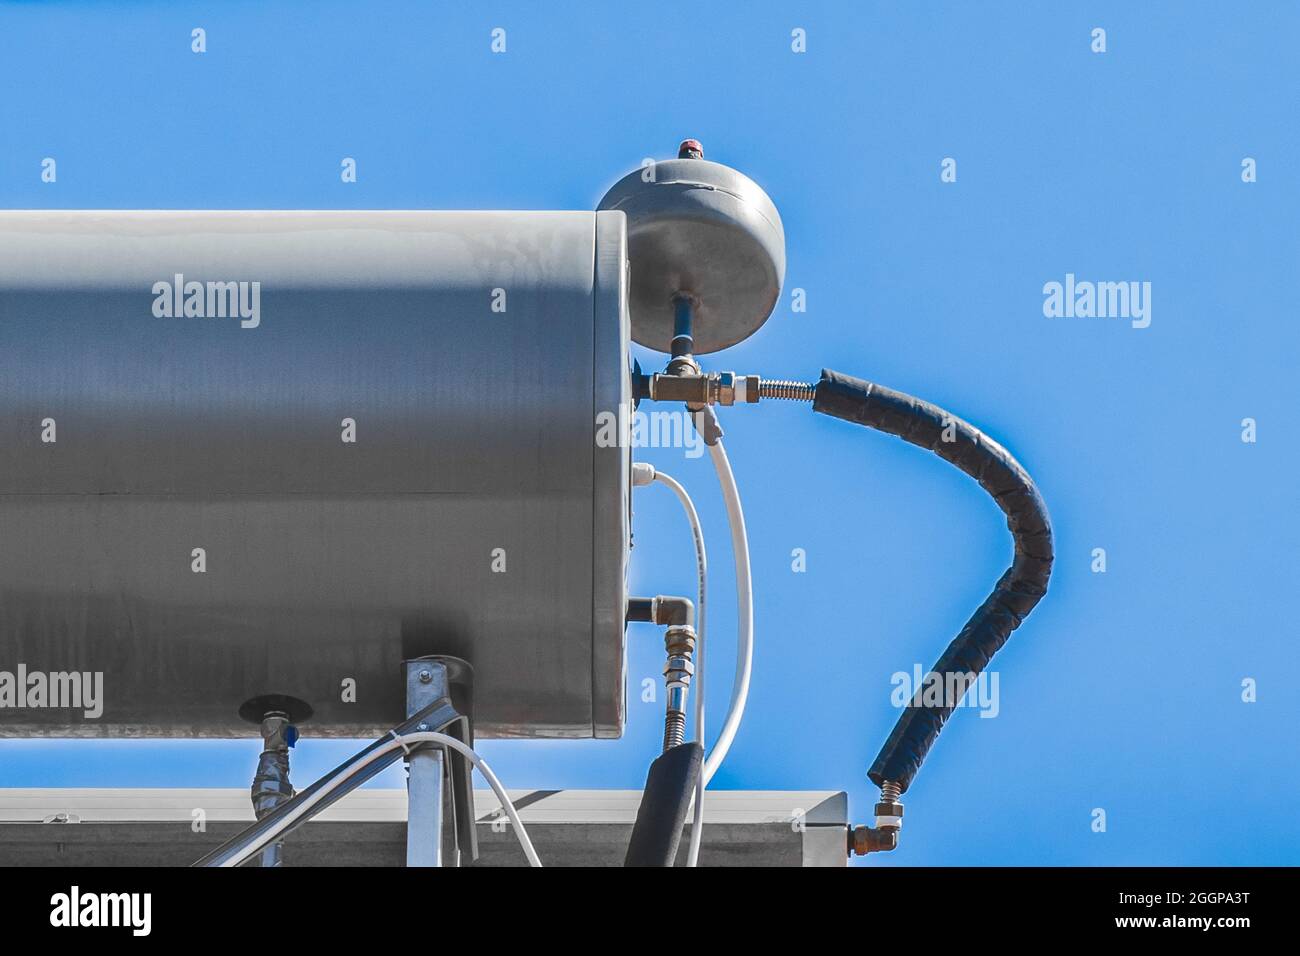 Water boiler heater tank system and hot technology on the roof of the house against the blue sky. Stock Photo